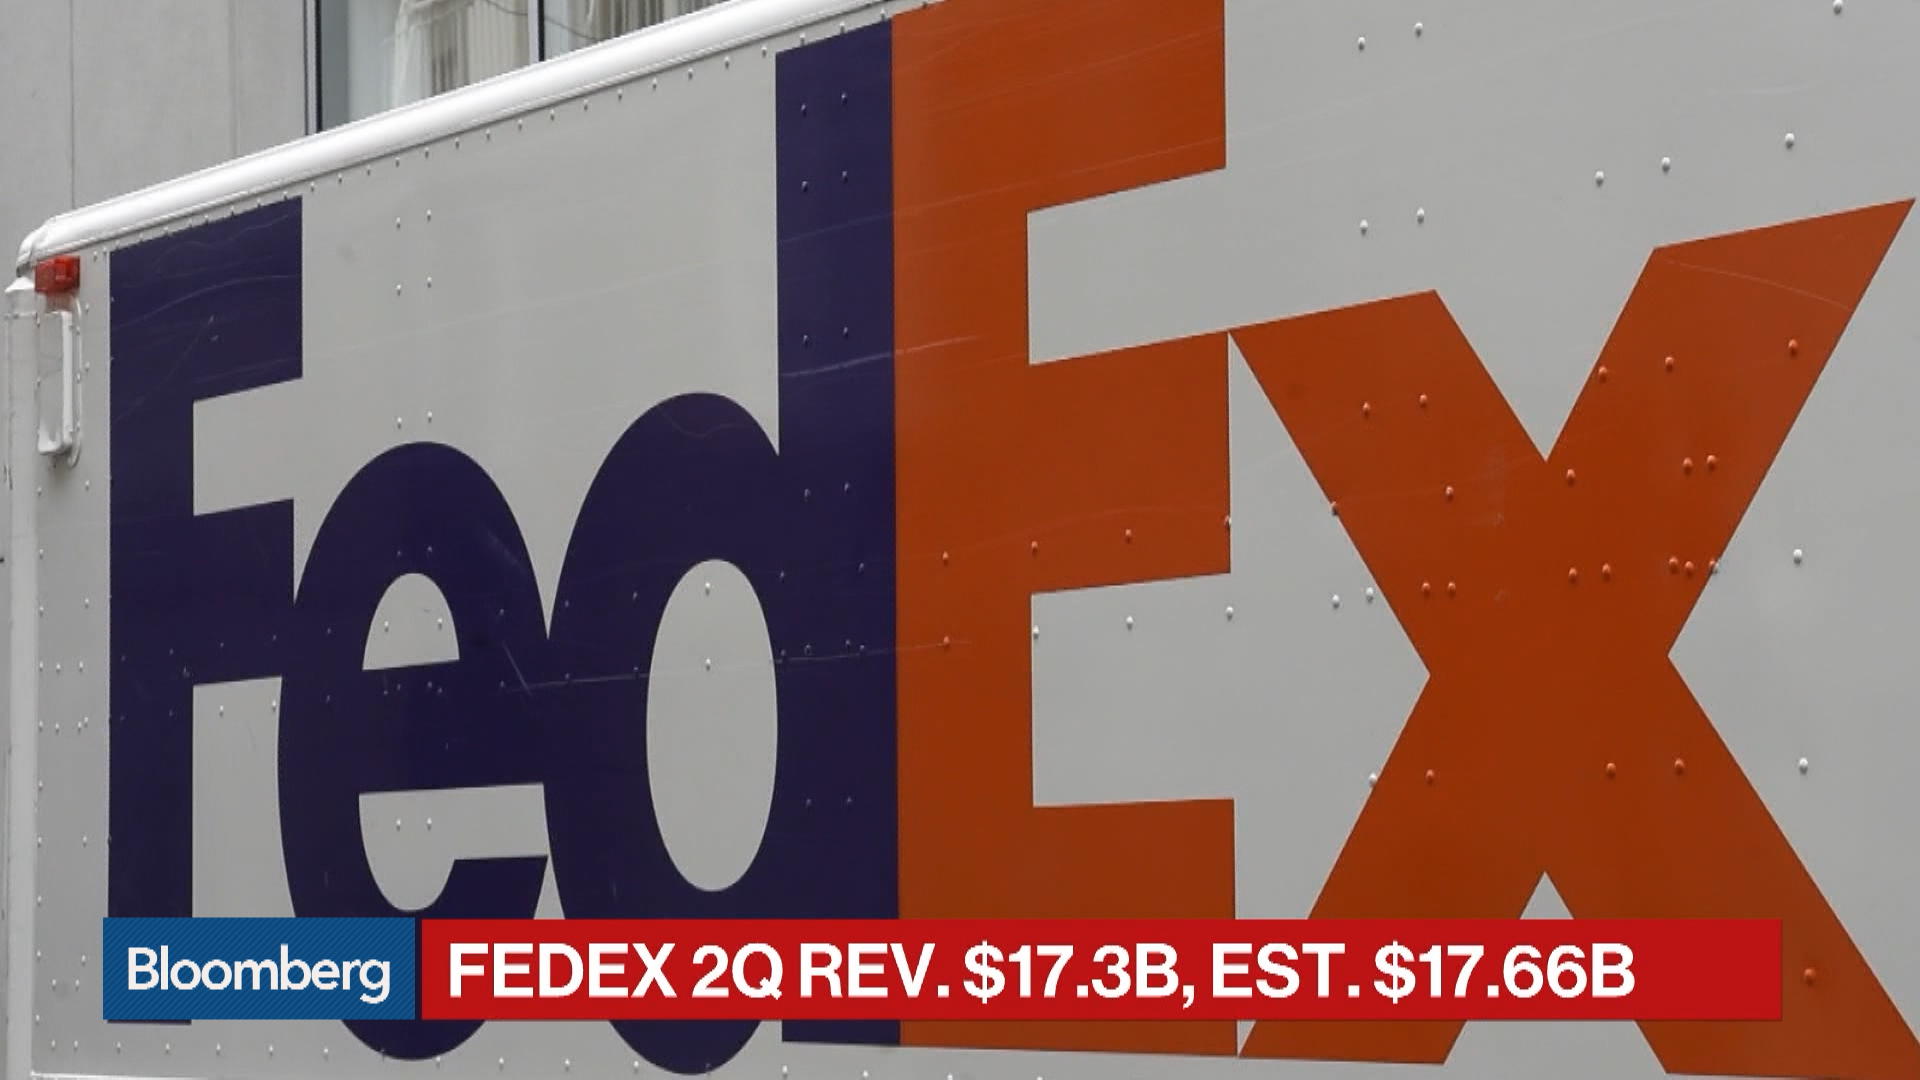 FedEx News, Articles, Stories & Trends for Today